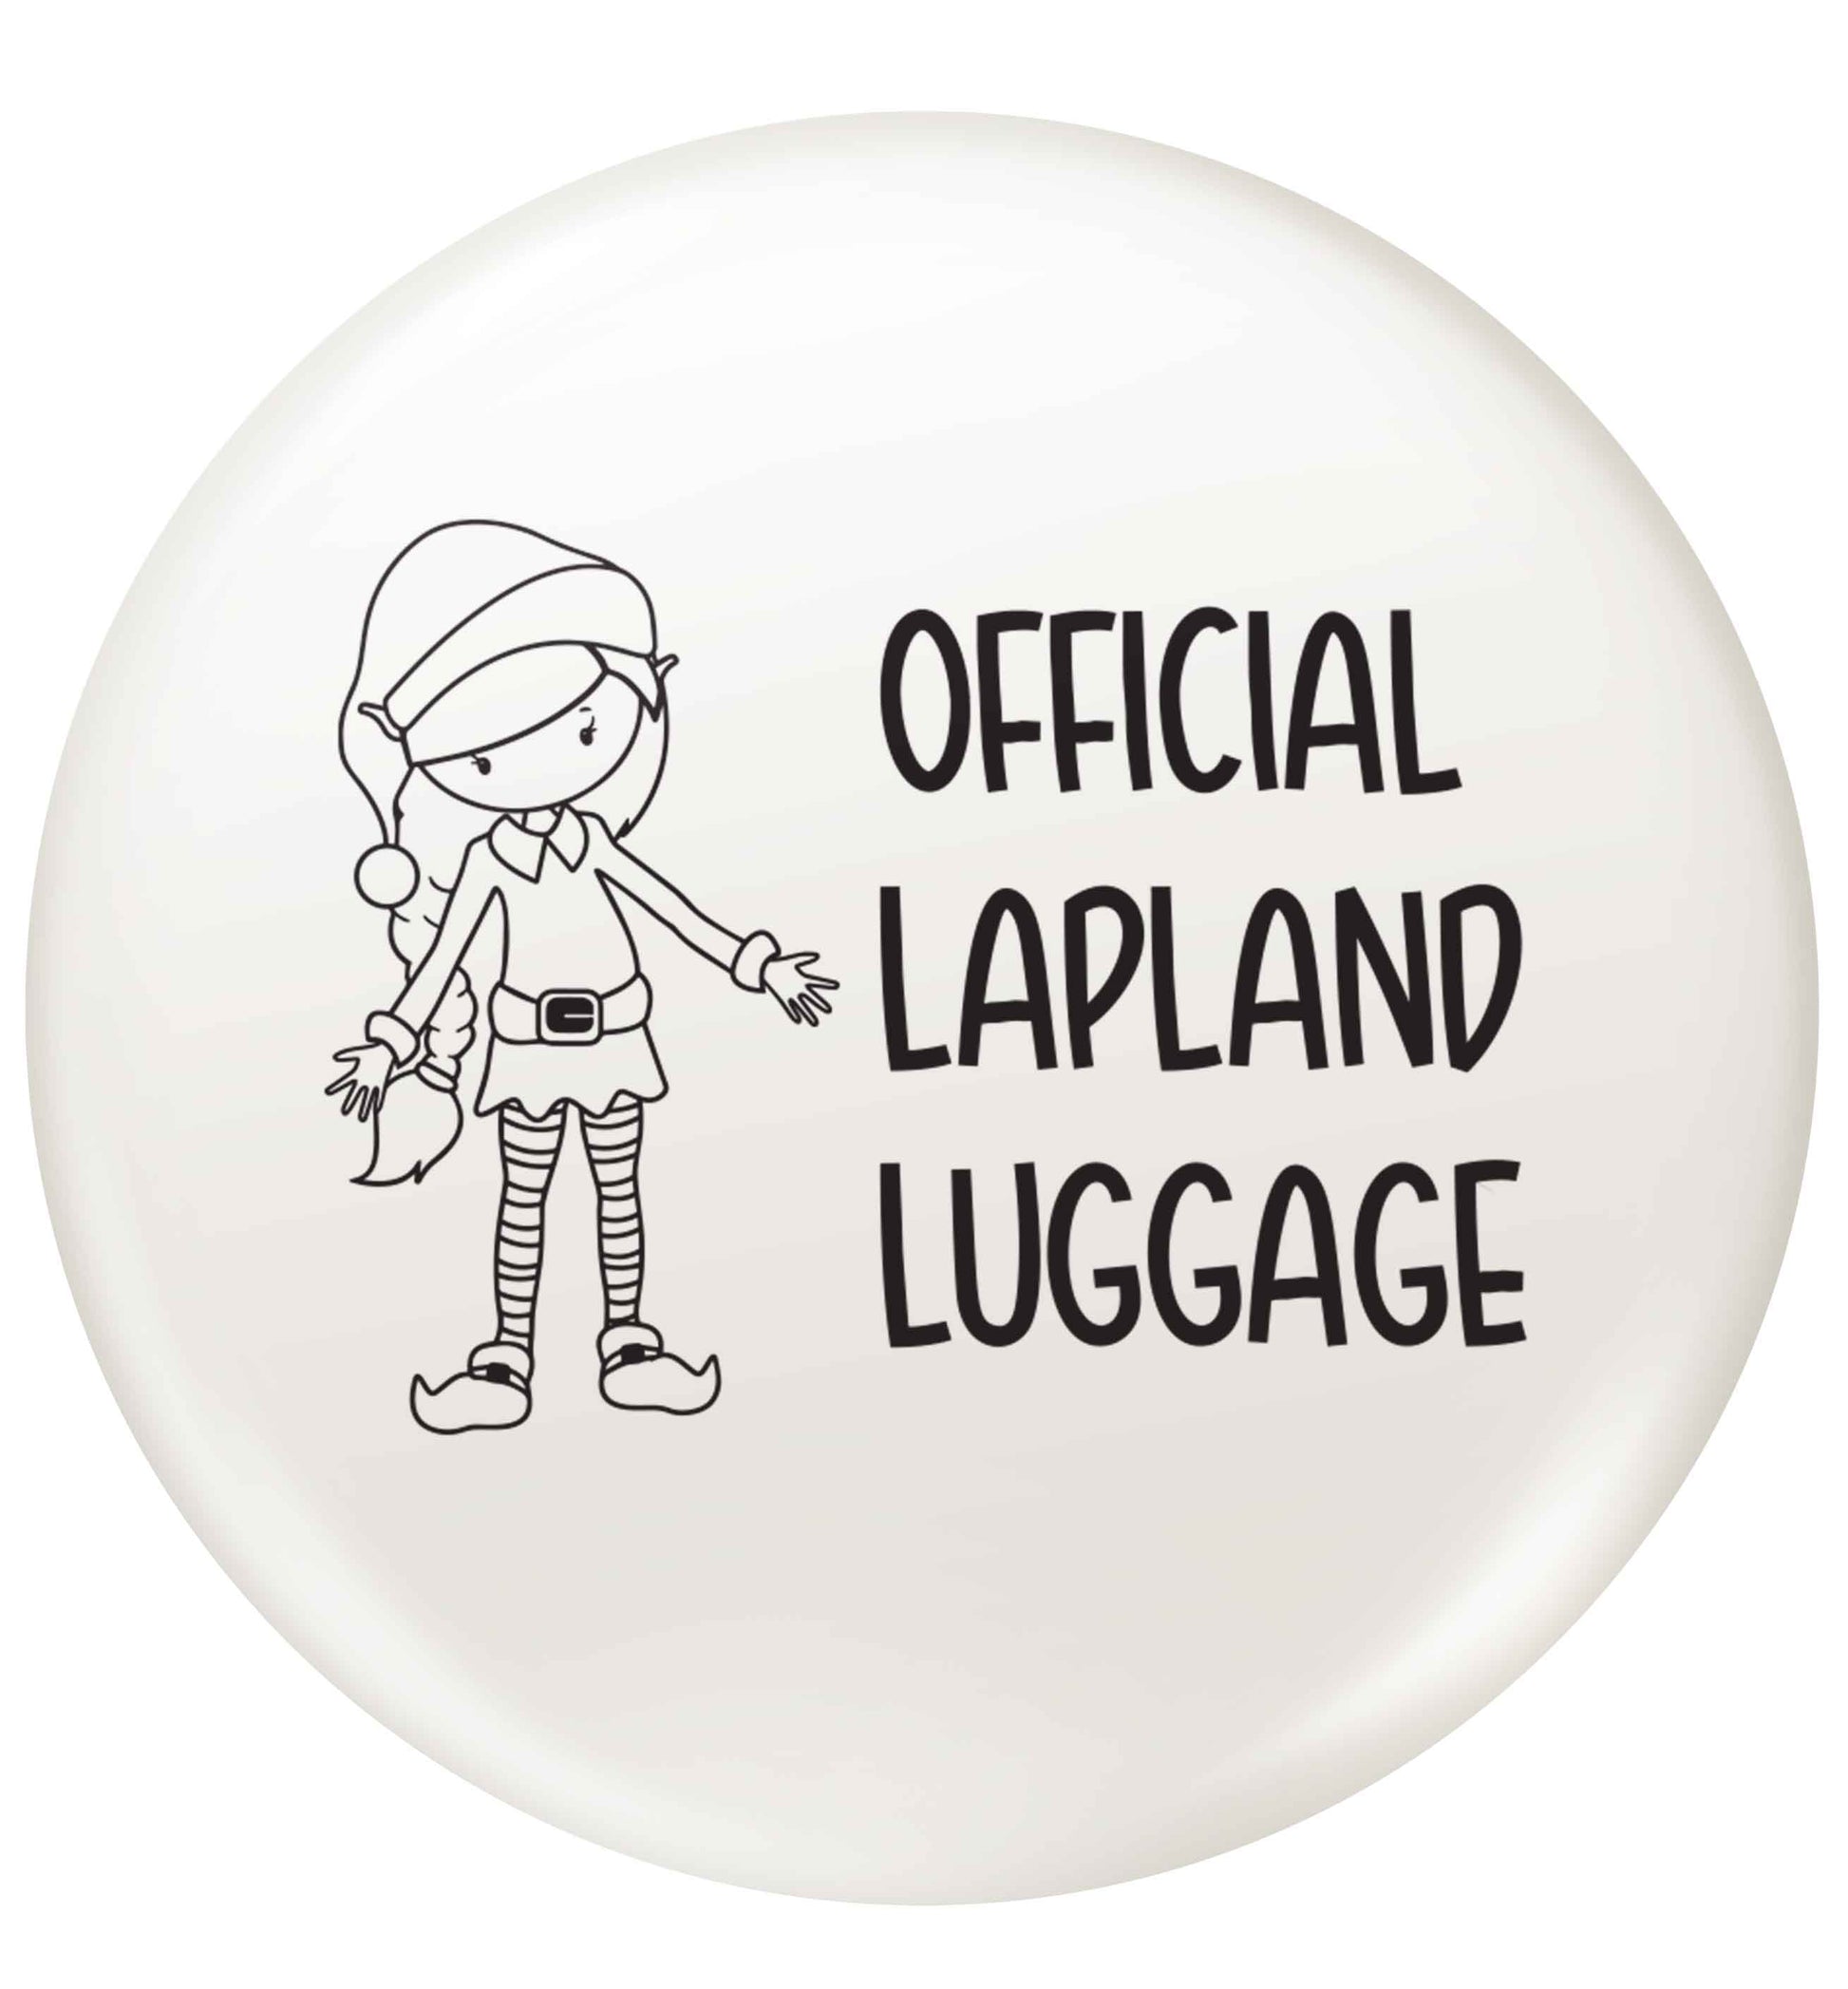 Official lapland luggage - Elf snowflake small 25mm Pin badge